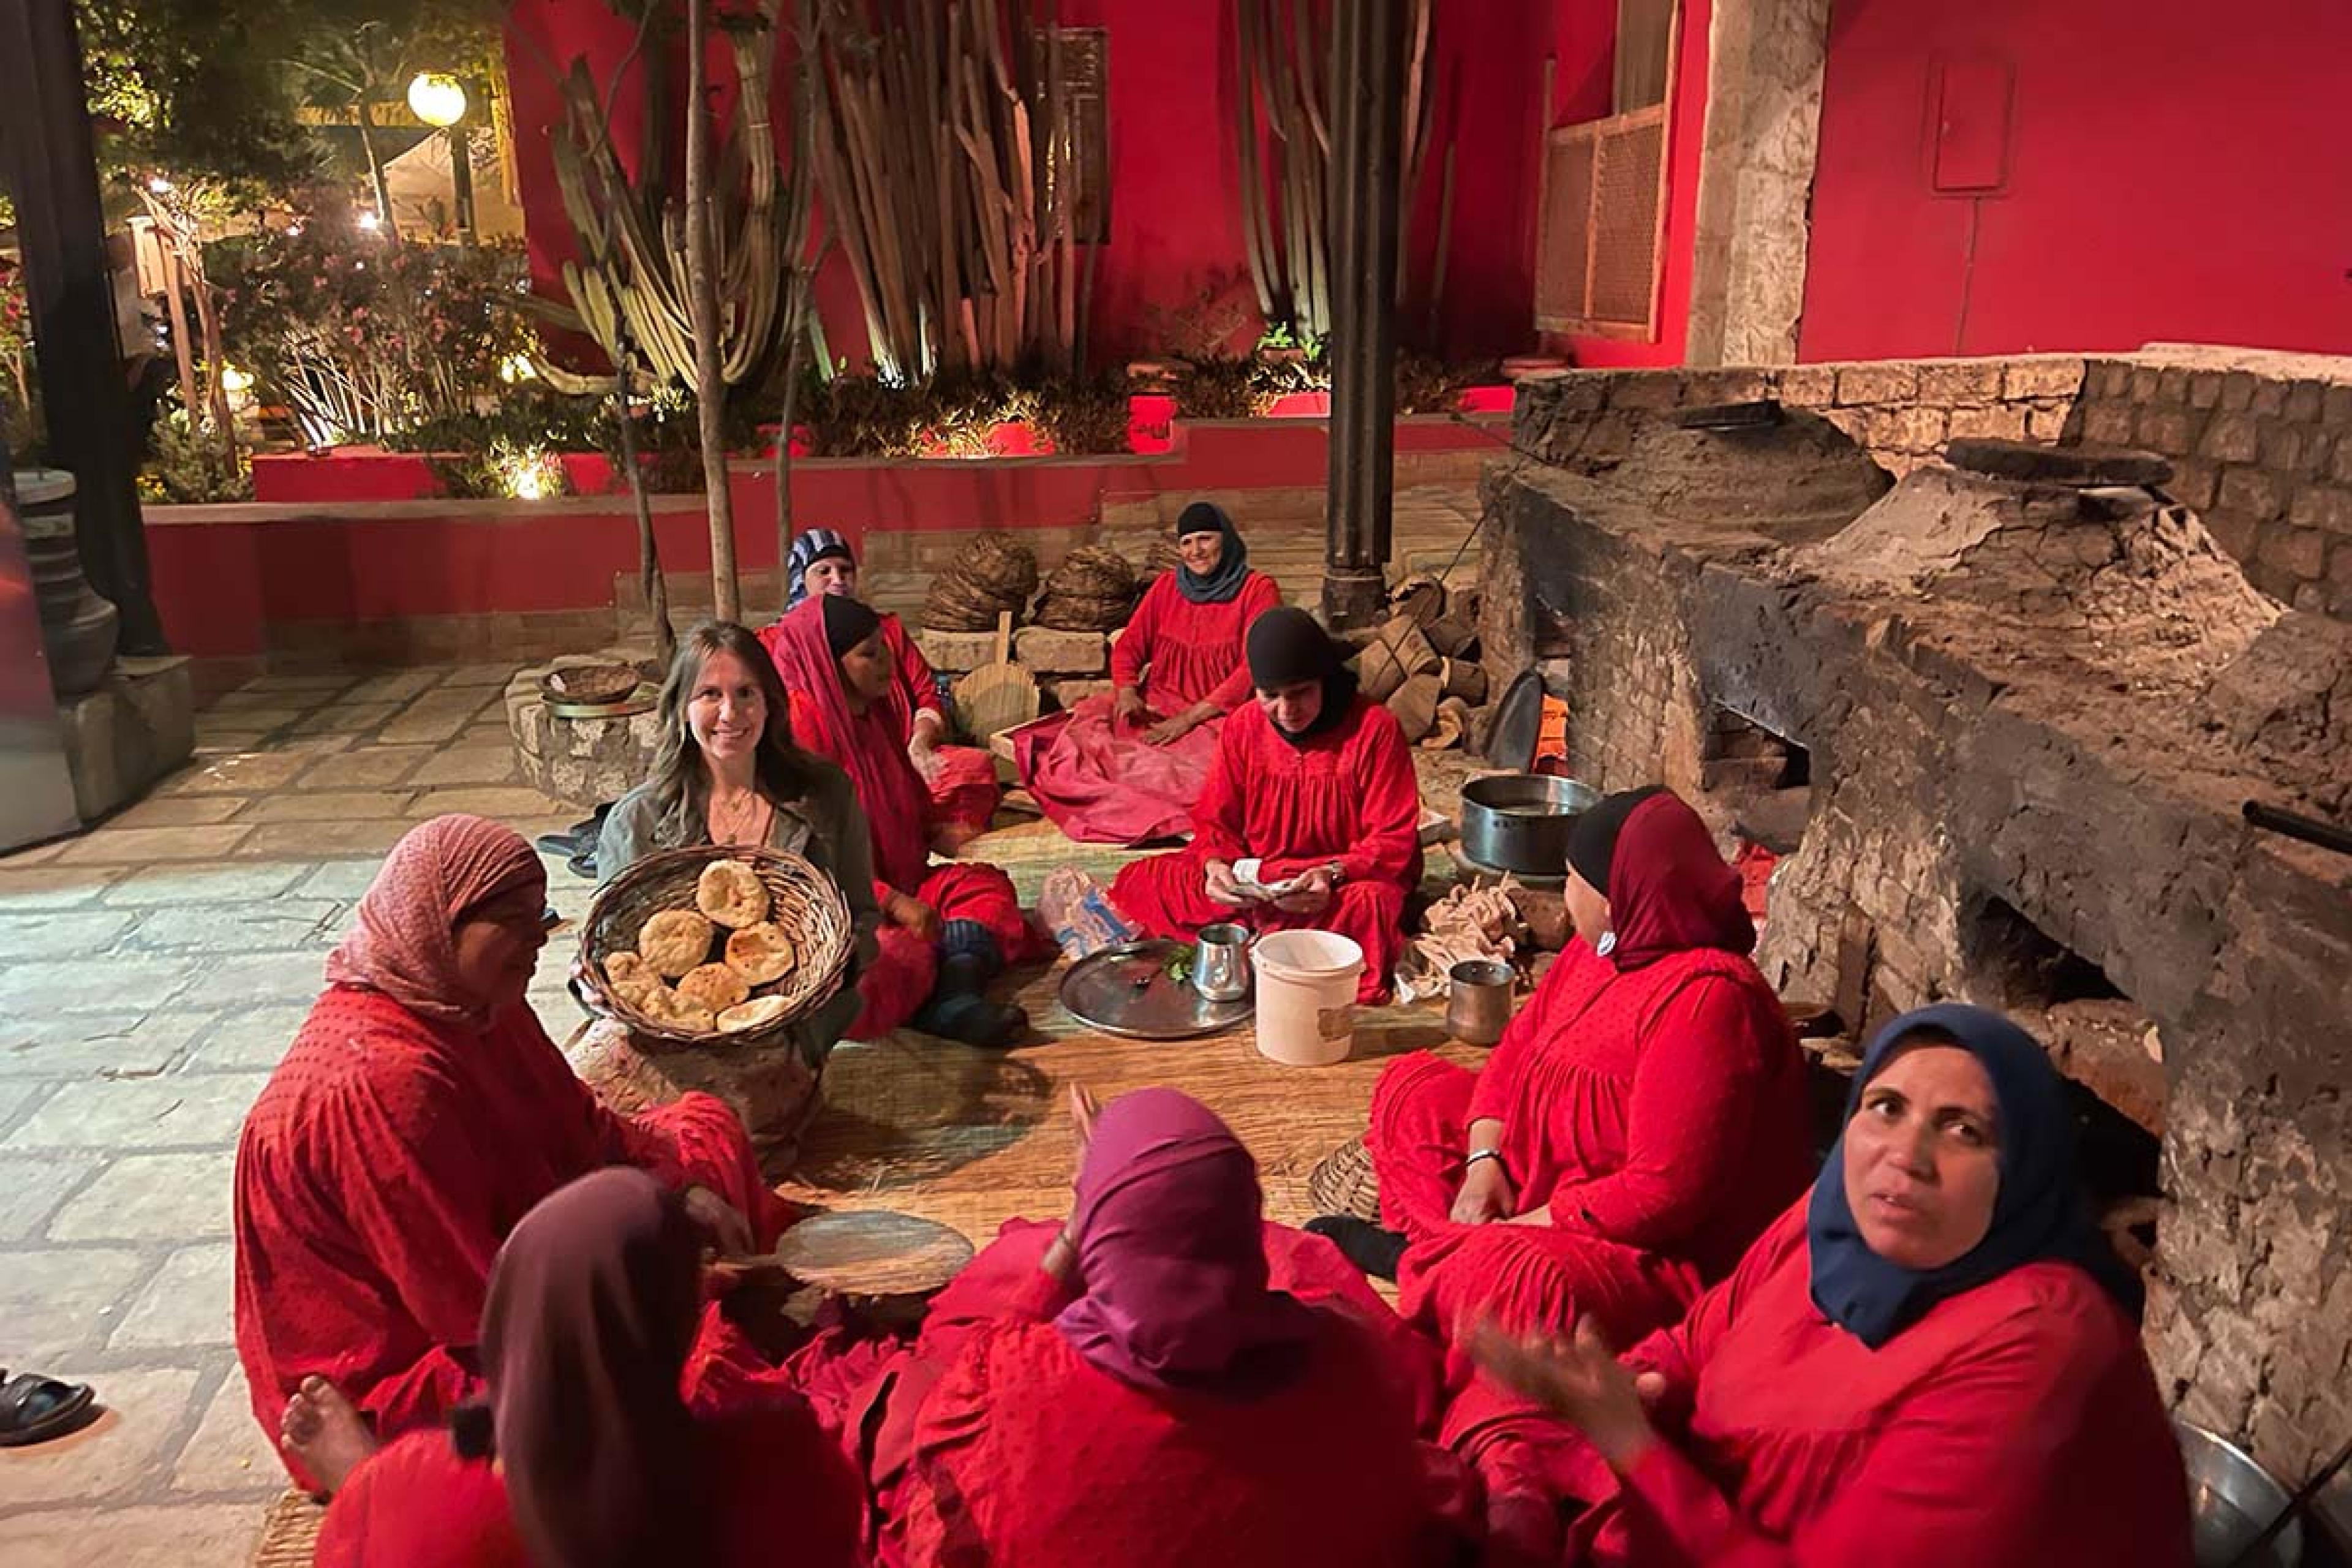 people dressed in red seated on a woven rug eating